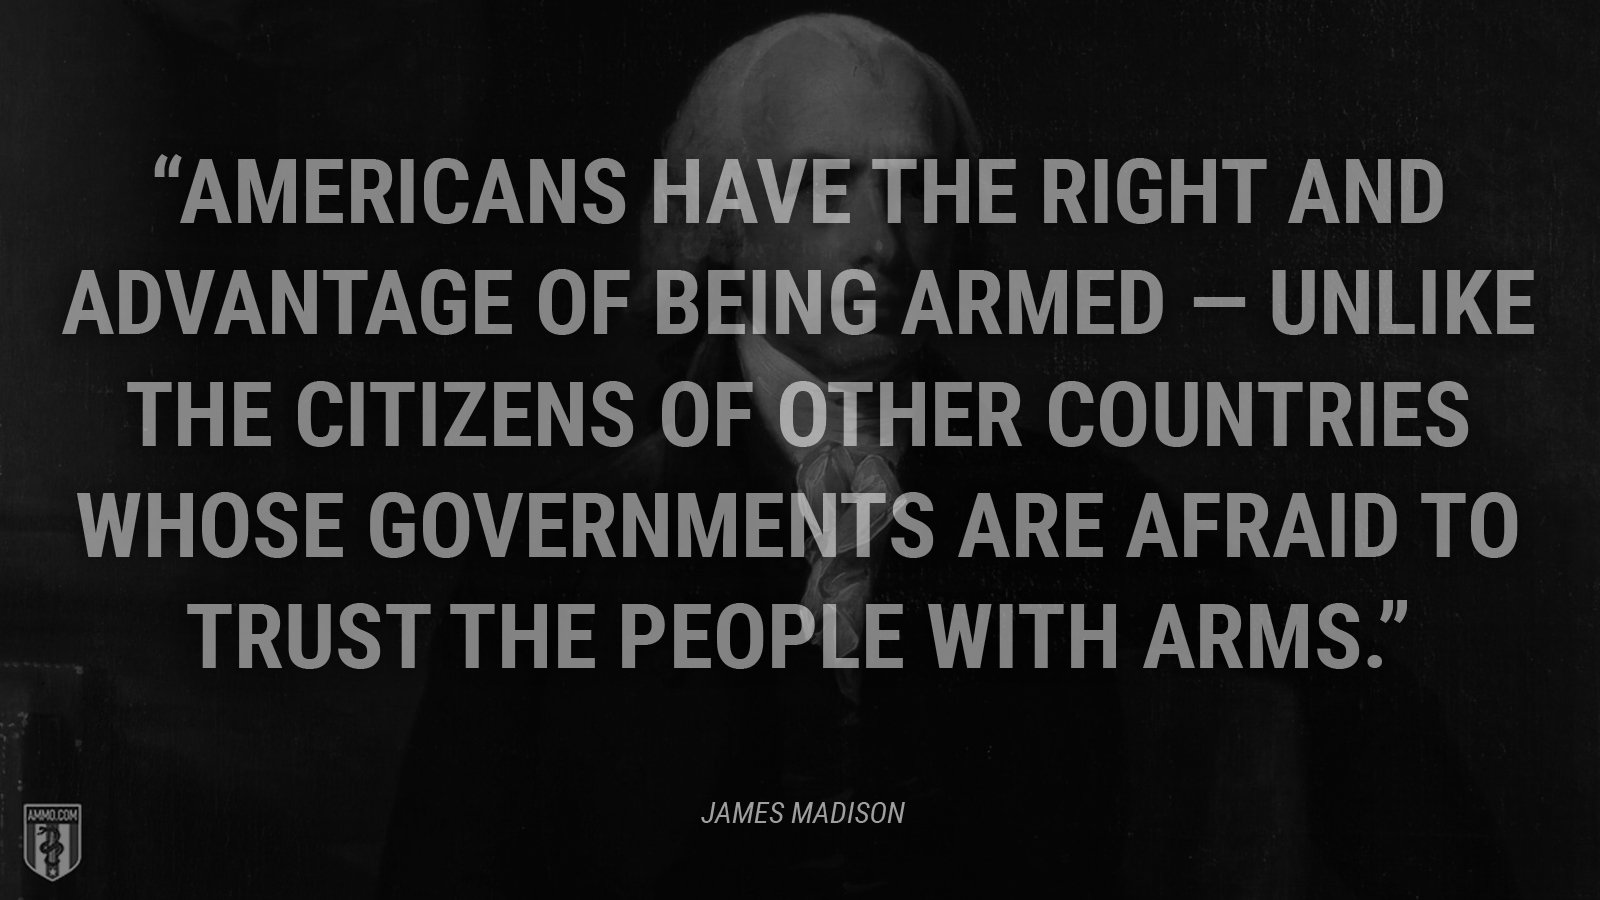 “Americans have the right and advantage of being armed ― unlike the citizens of other countries whose governments are afraid to trust the people with arms.” - James Madison